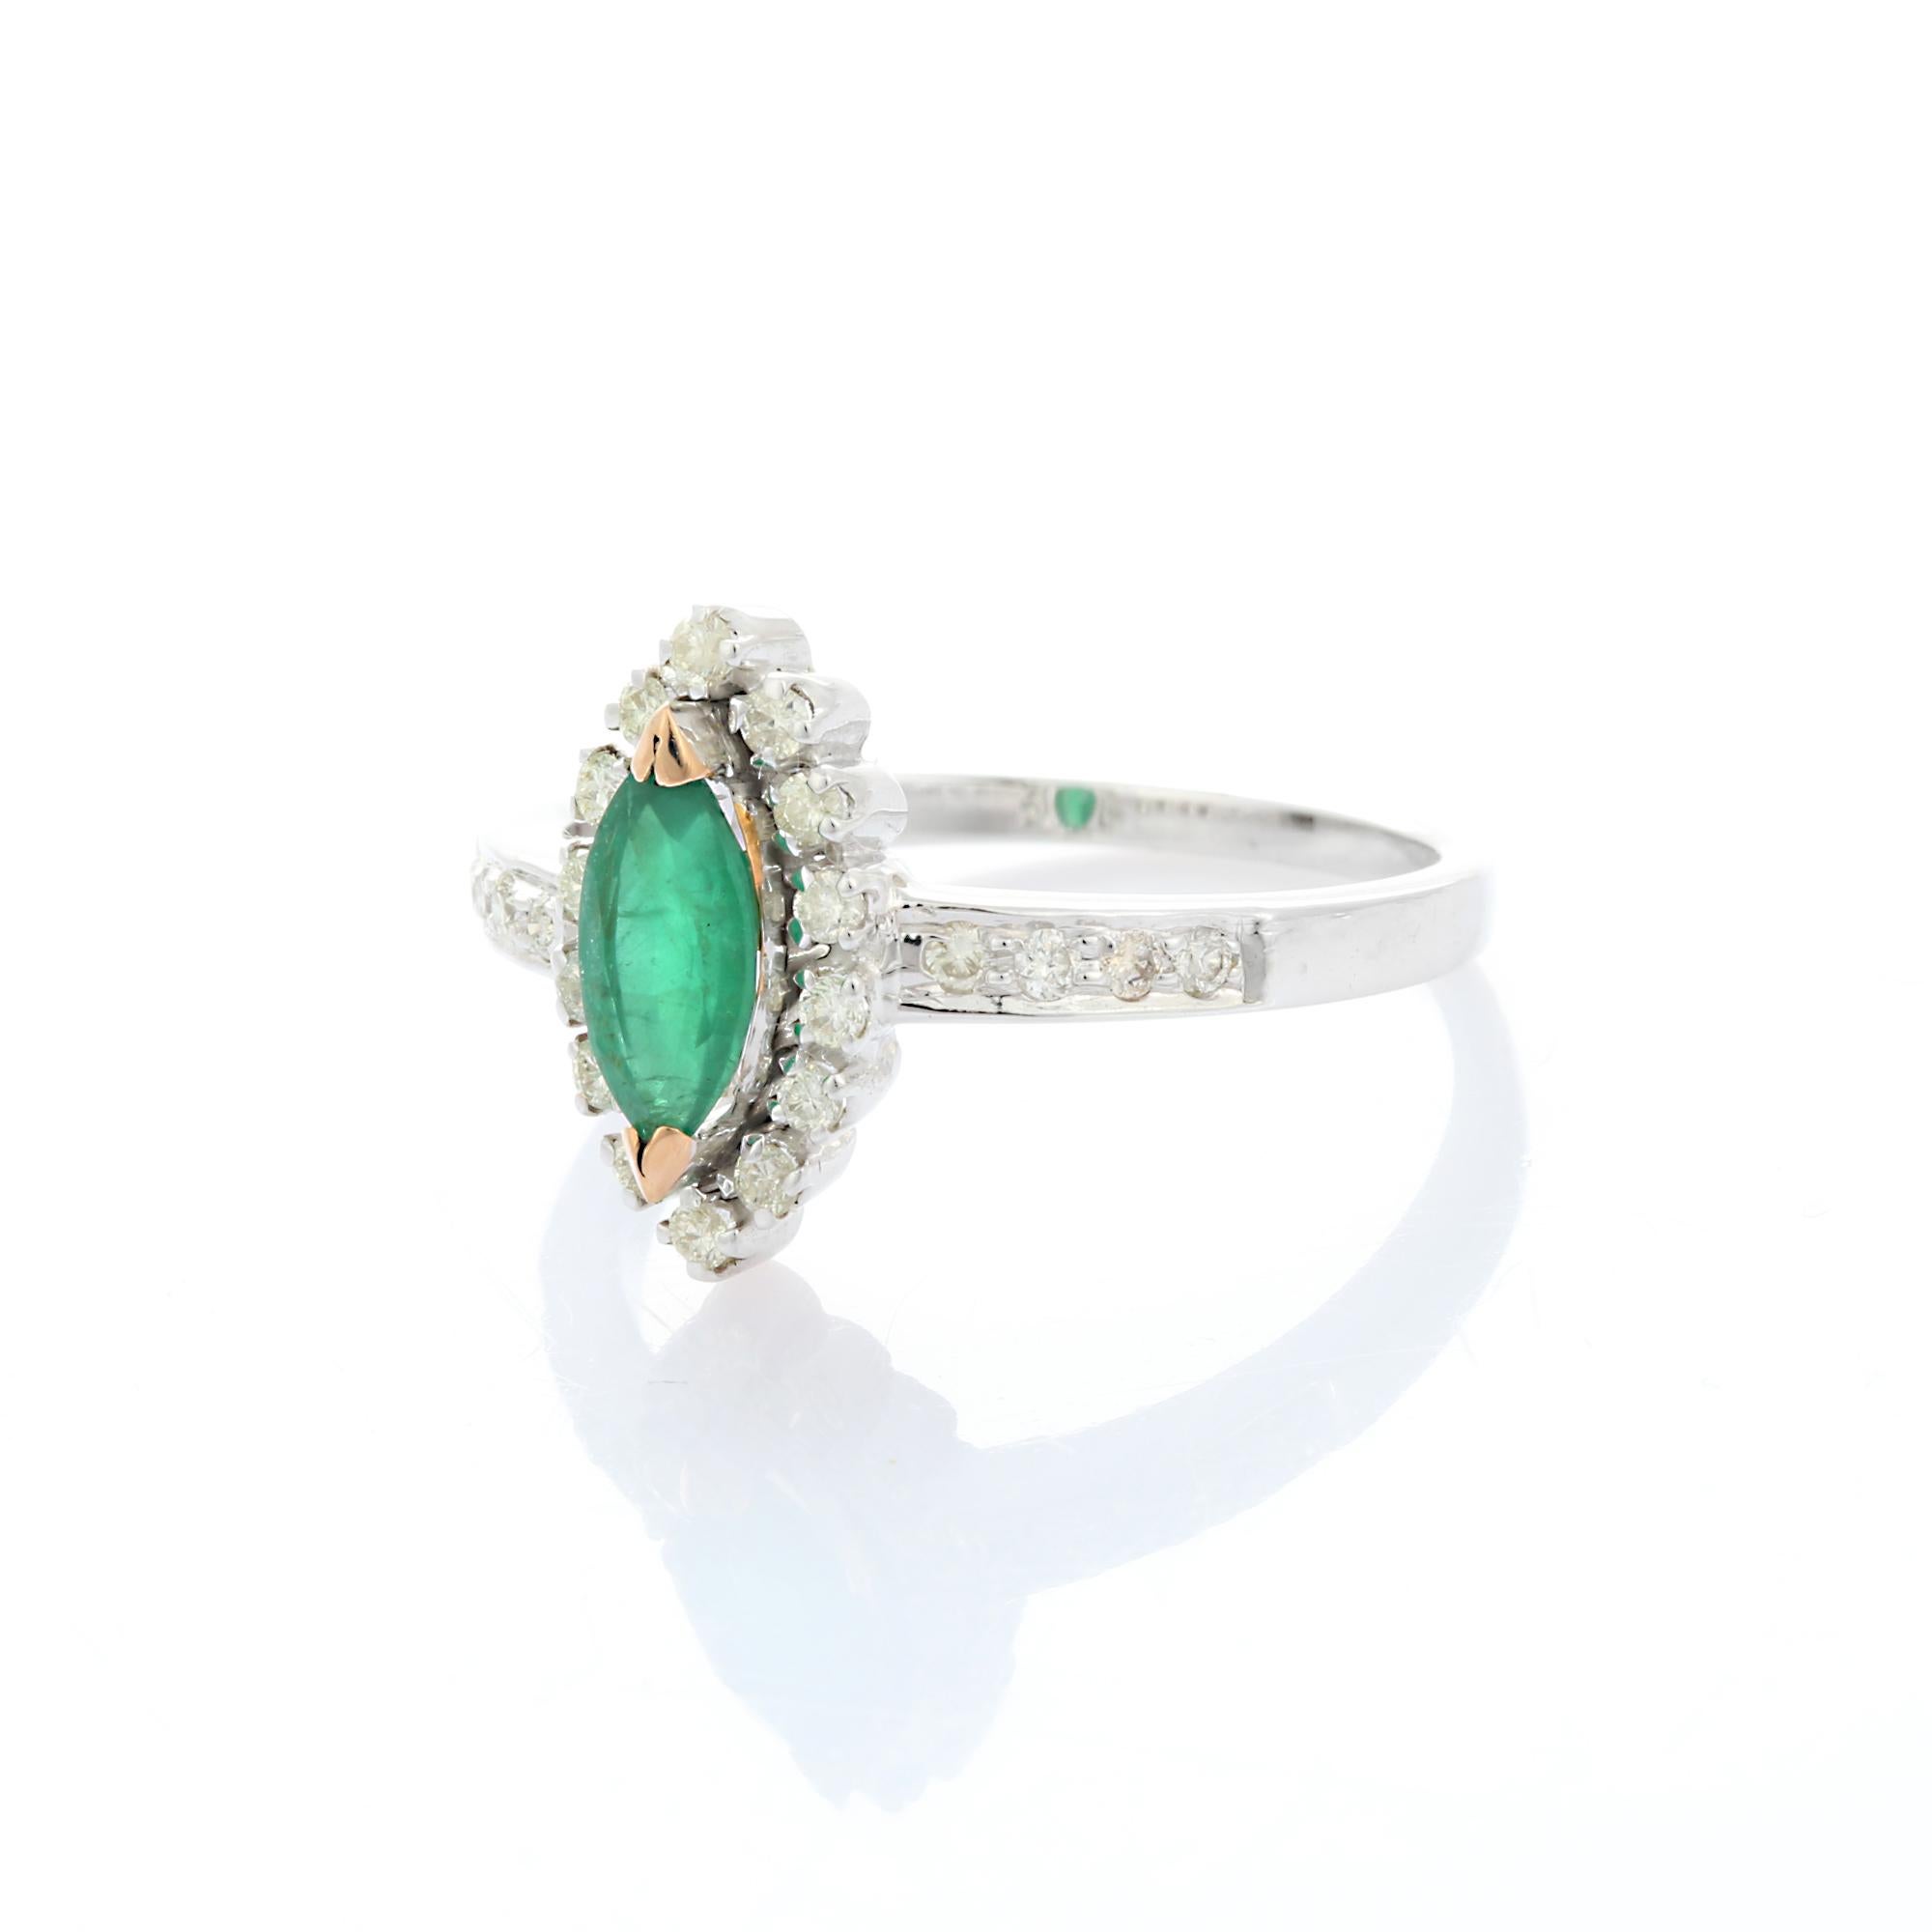 For Sale:  Marquise Shaped Emerald and Diamond Ring in 14K White Gold 6